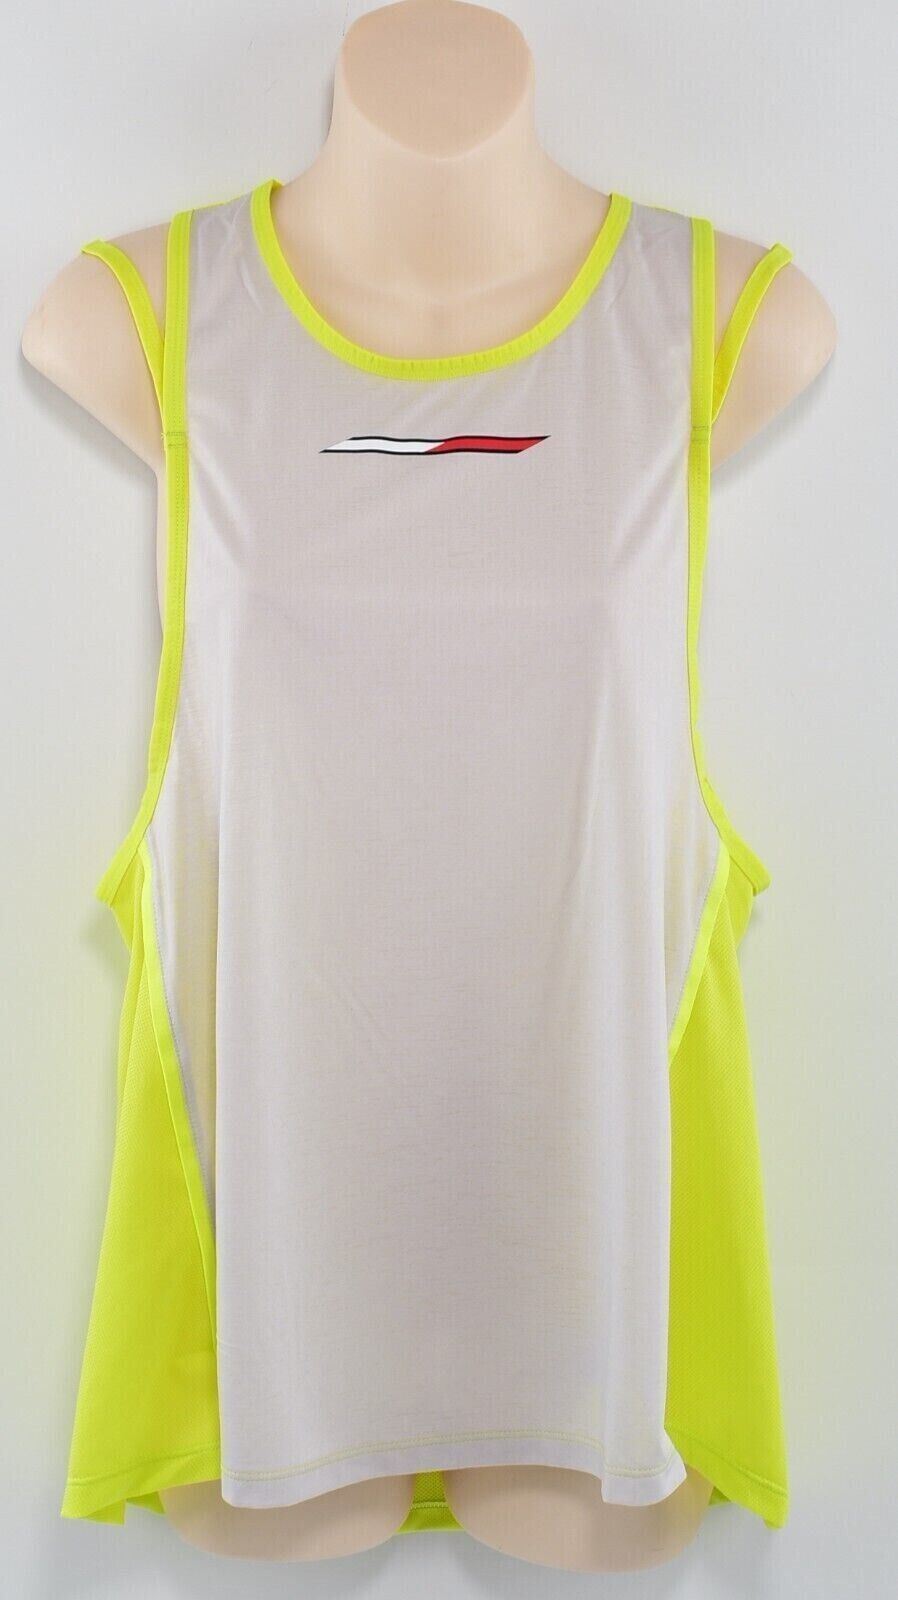 TOMMY HILFIGER Activewear Women's Relaxed Tank Top, Lemon Lime, size L (UK 14)